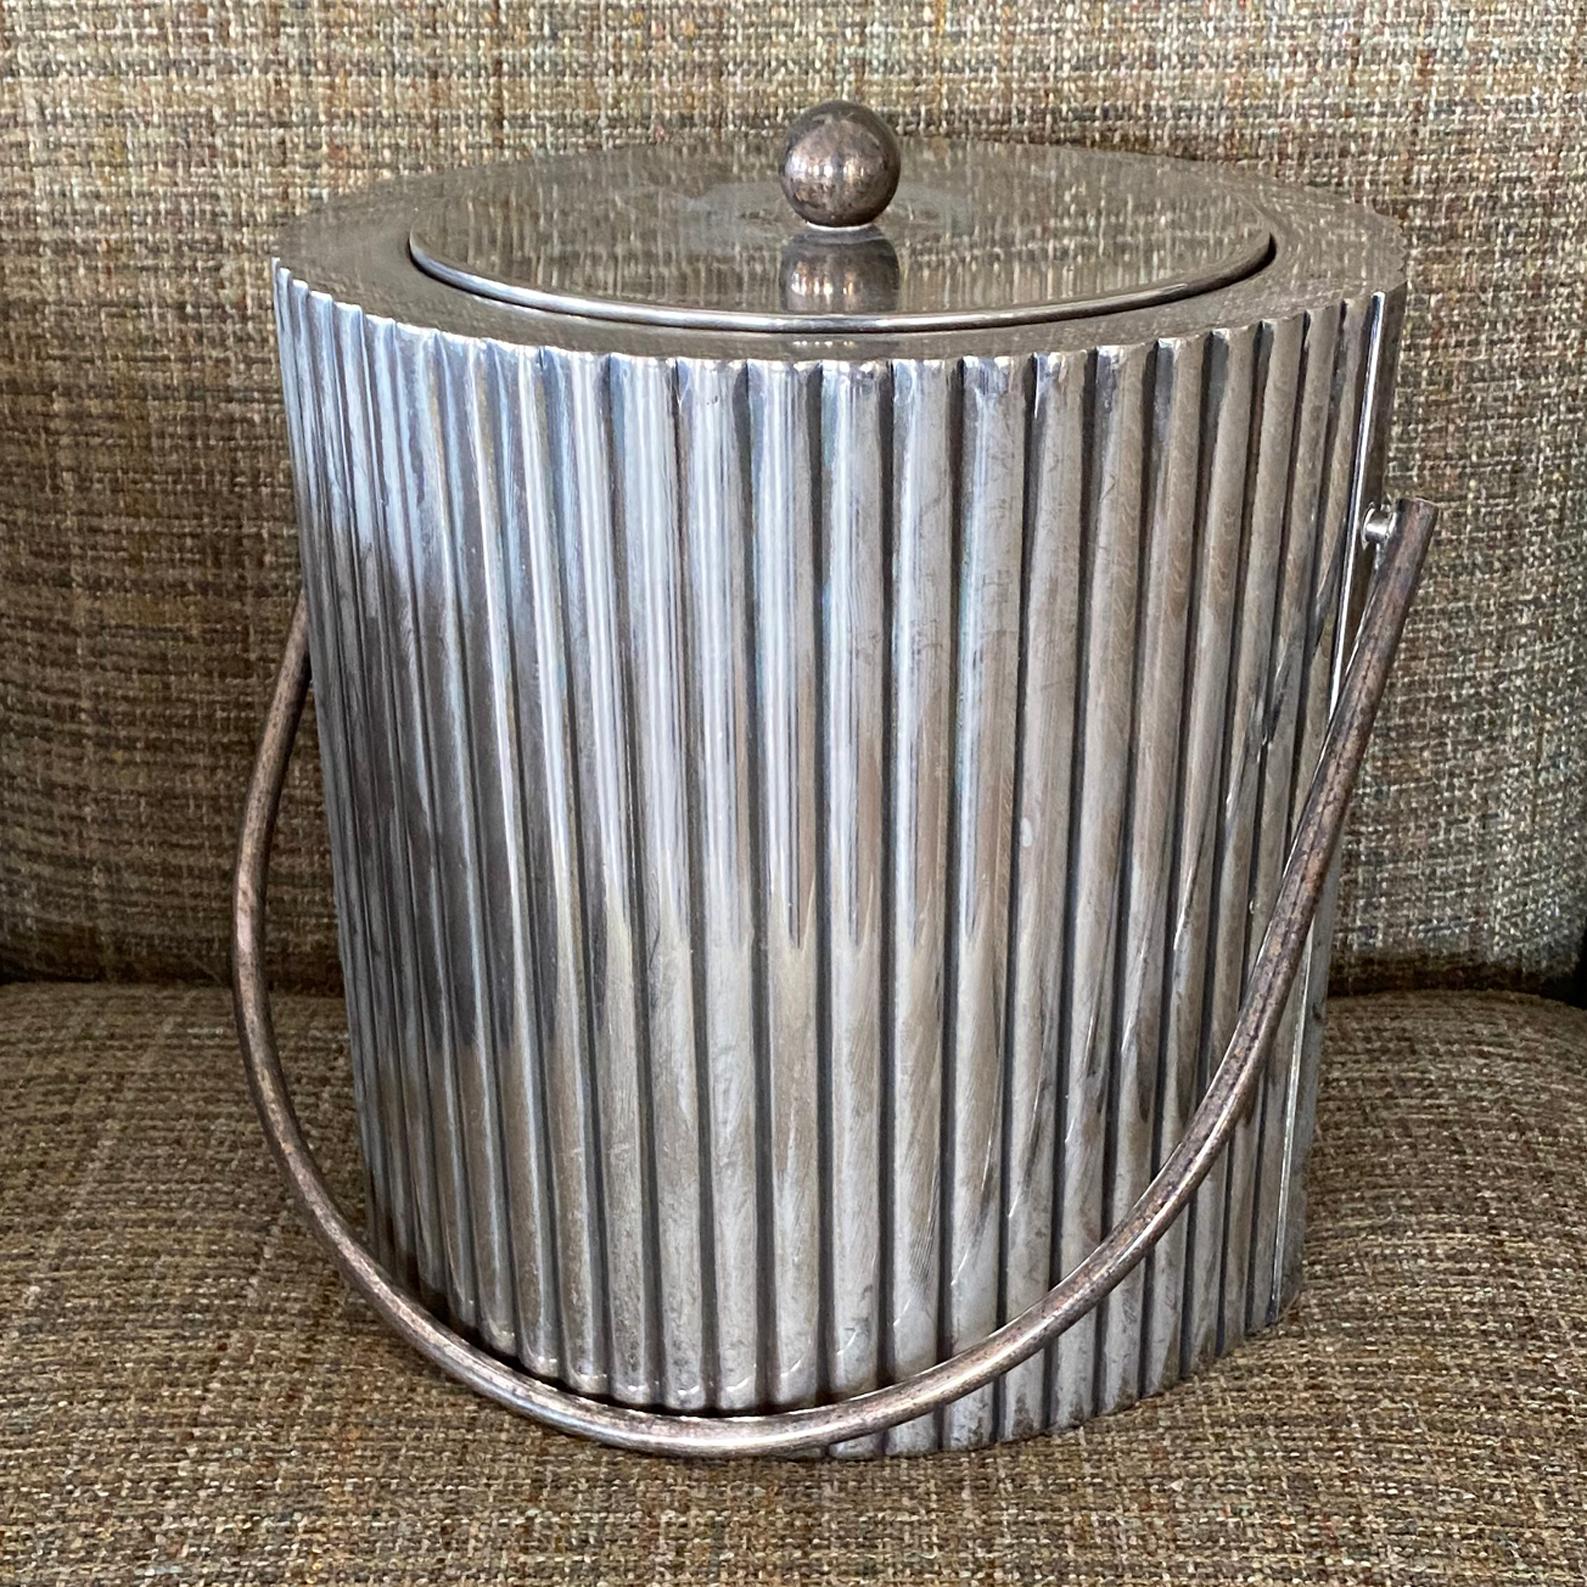 Handcrafted Secessionist Style Silver-Plated Ice Bucket from Cassetti, 1960s For Sale 1